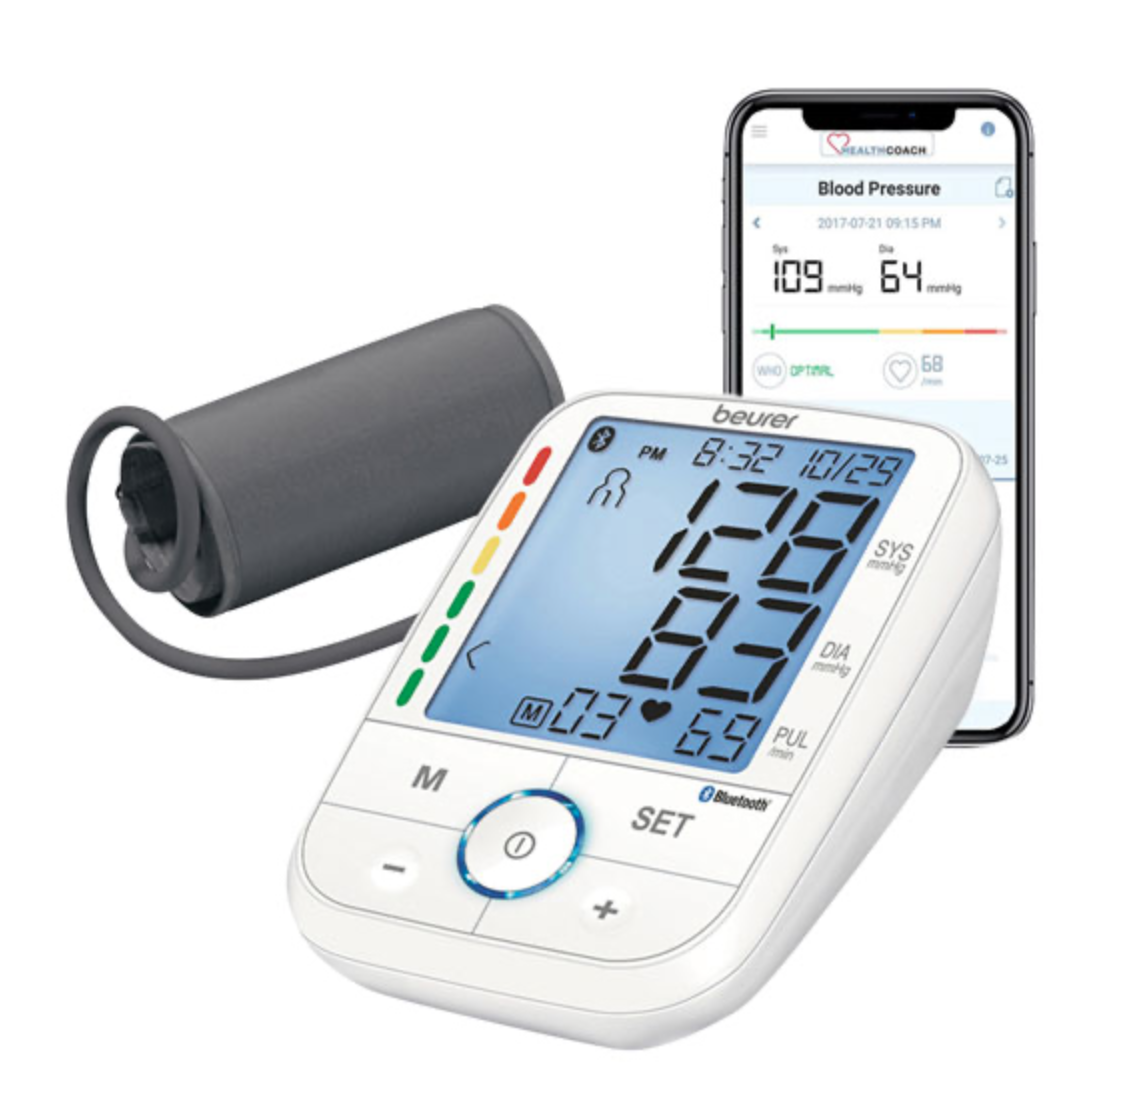 Omron unveils smartphone-connected blood pressure monitor, weight scale